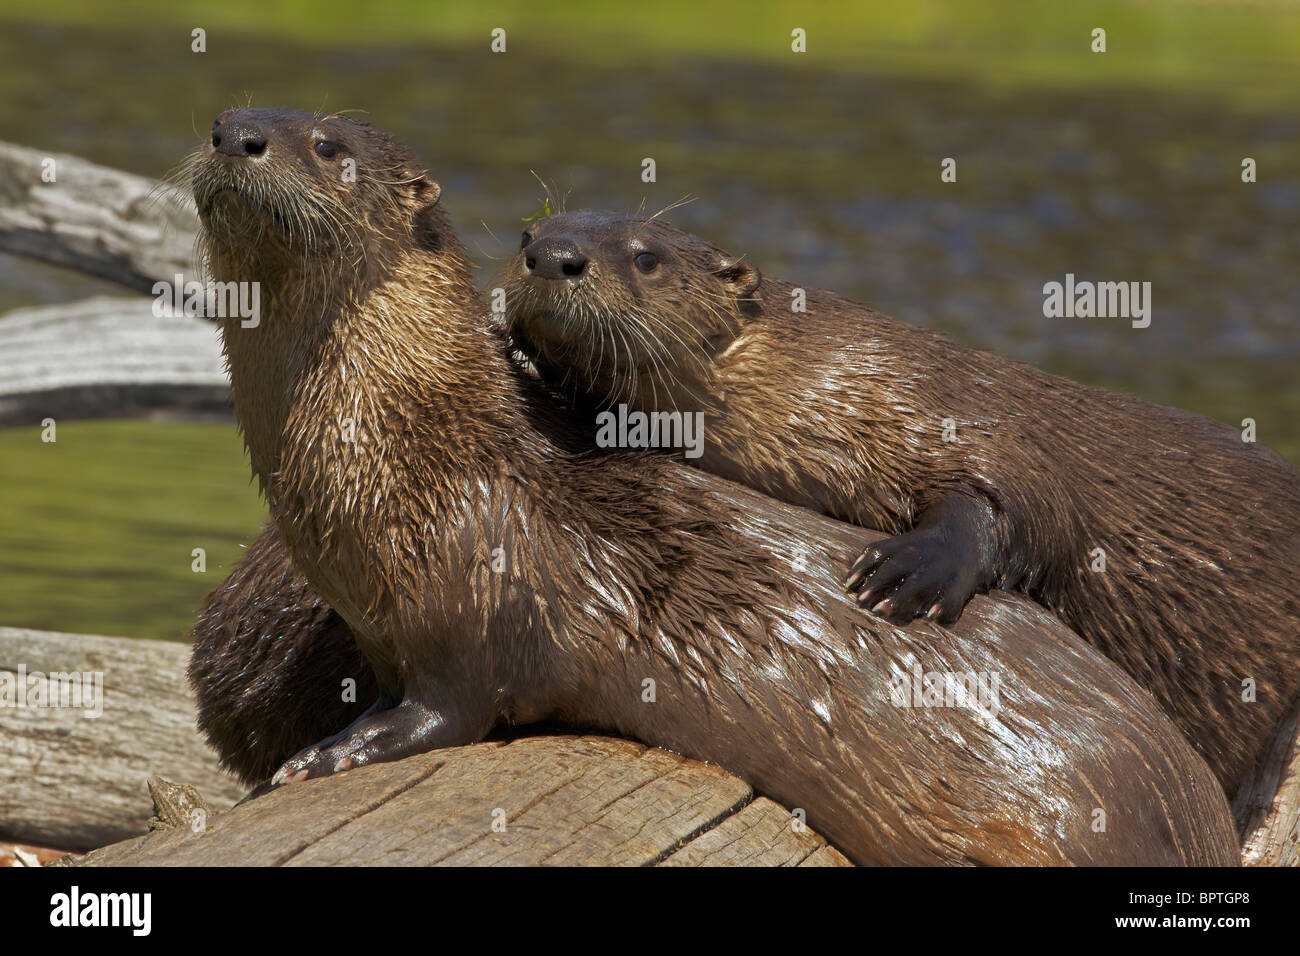 River Otter(s) - (Lutra canadensis) - Wyoming - Eat fish frogs turtles muskrats crayfish - playful intelligent animals Stock Photo